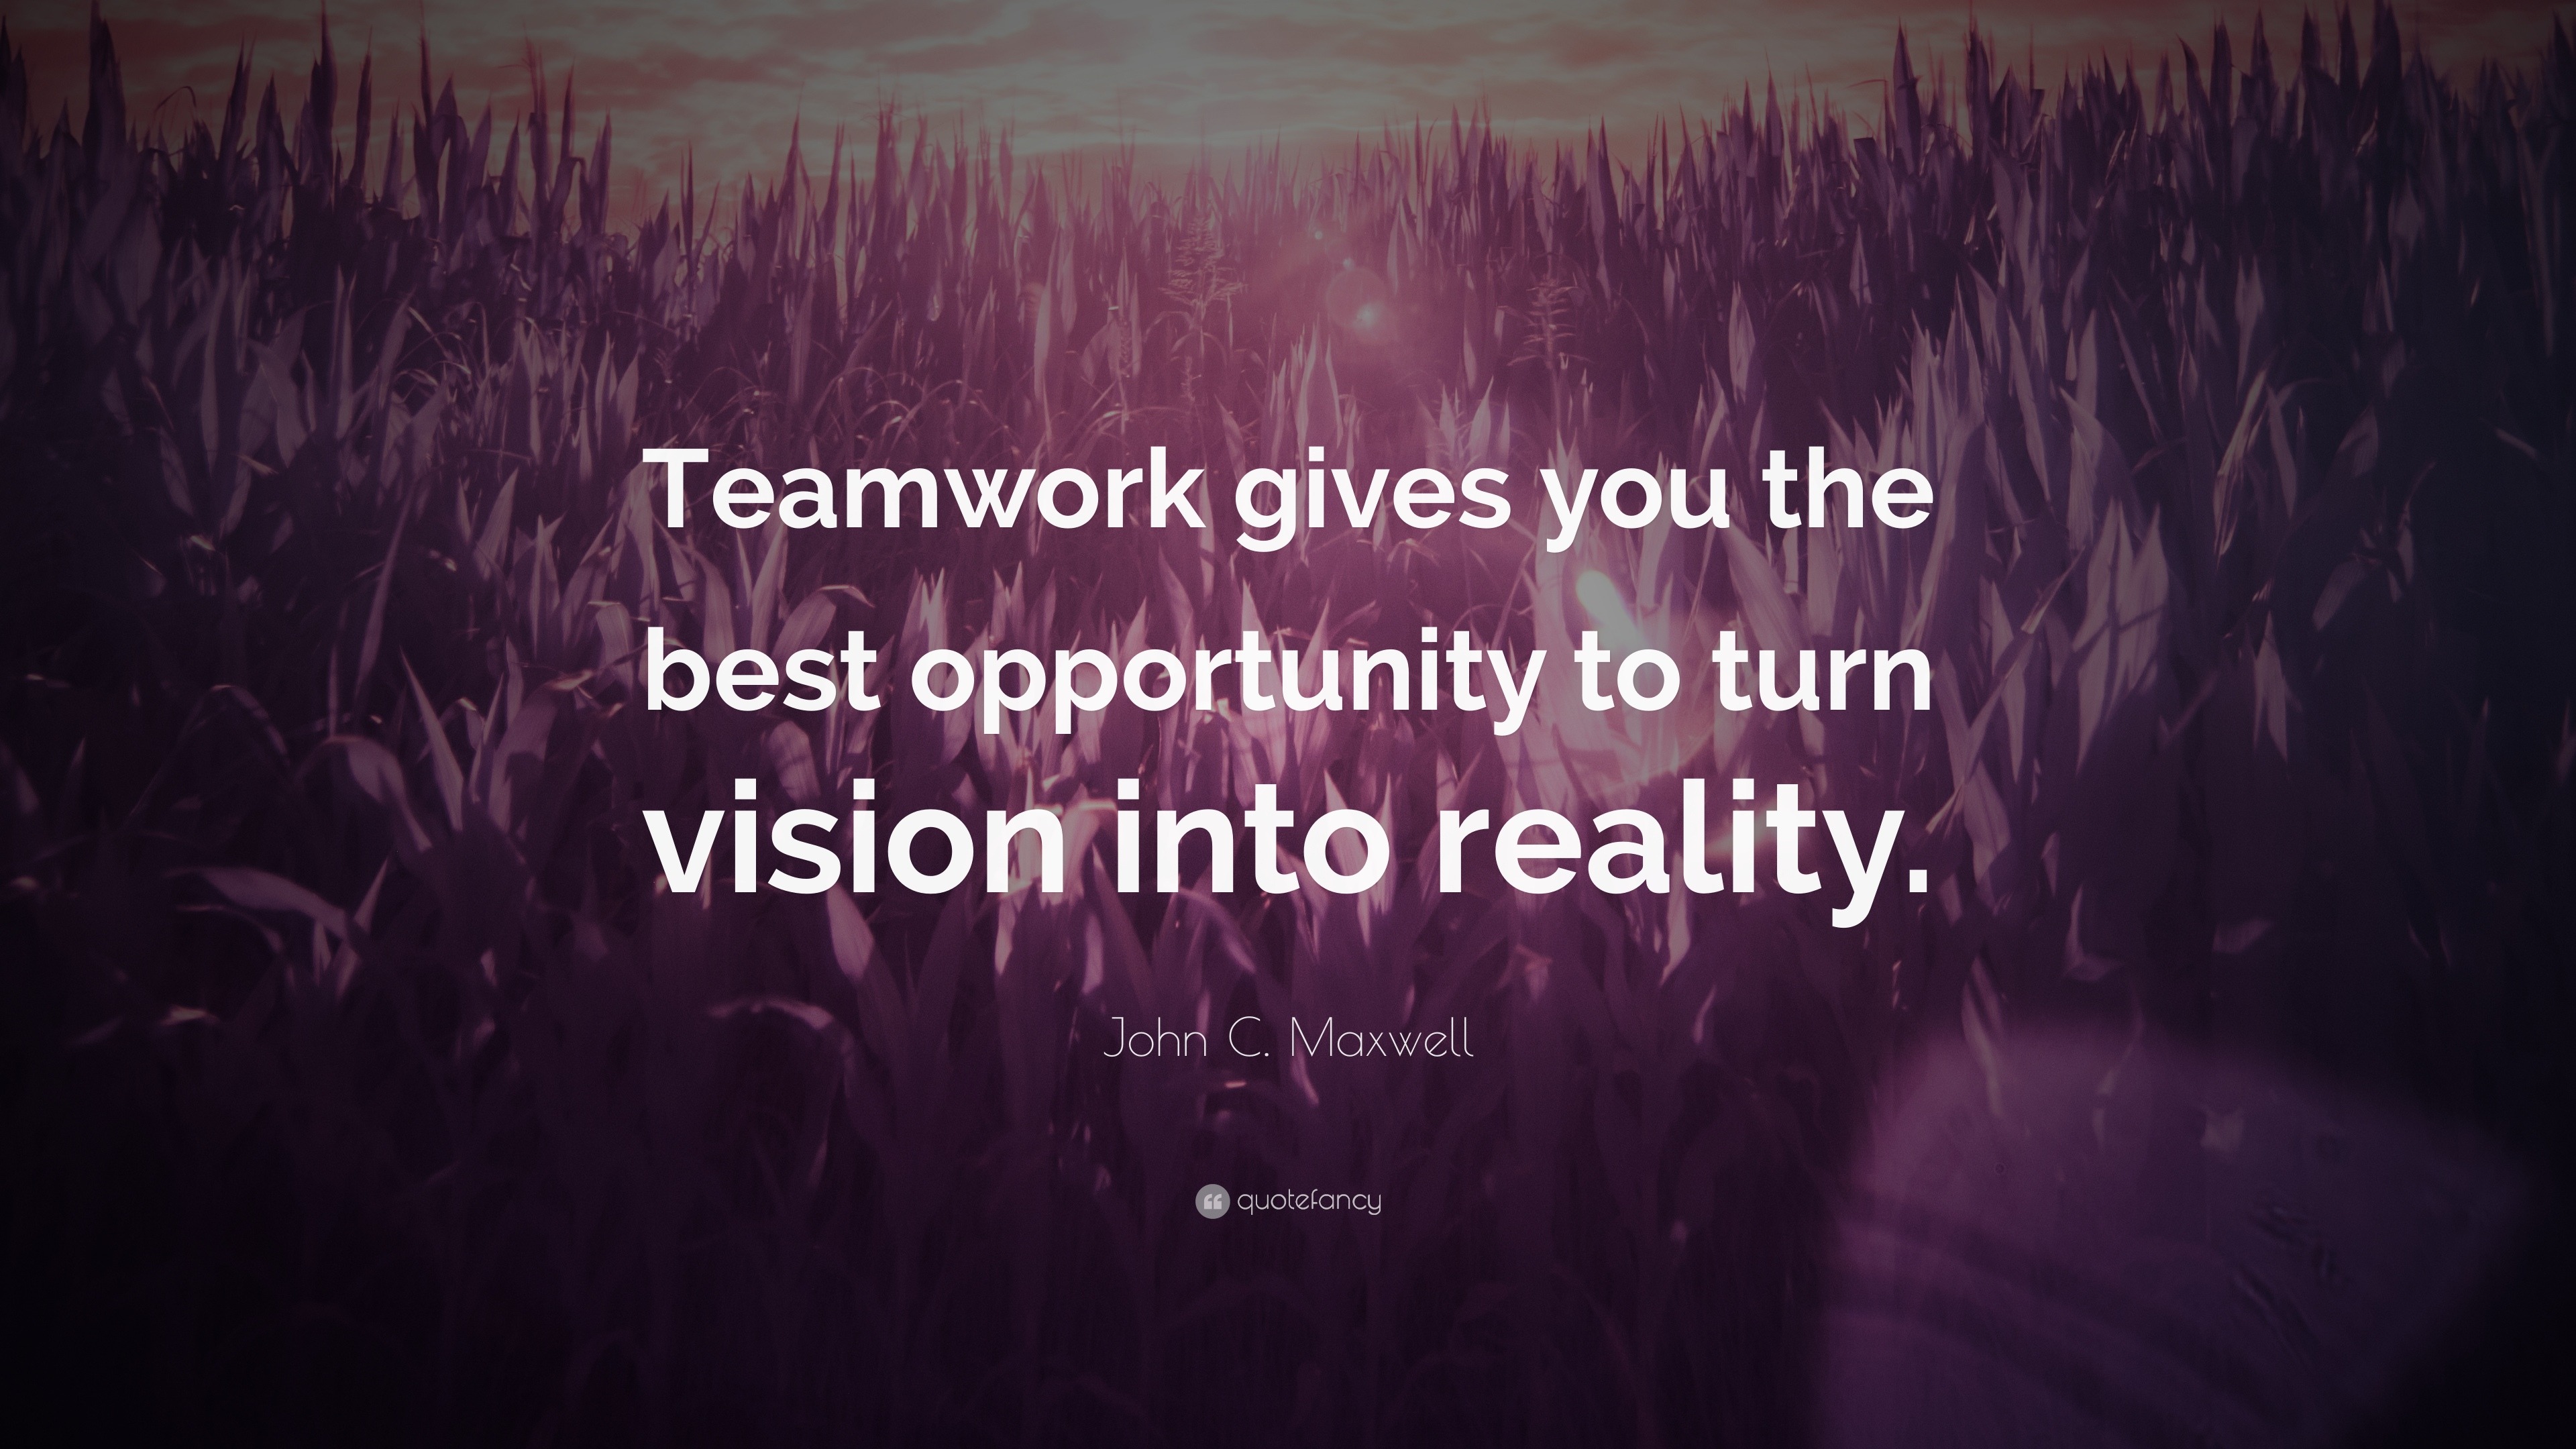 John C. Maxwell Quote: “Teamwork gives you the best opportunity to turn